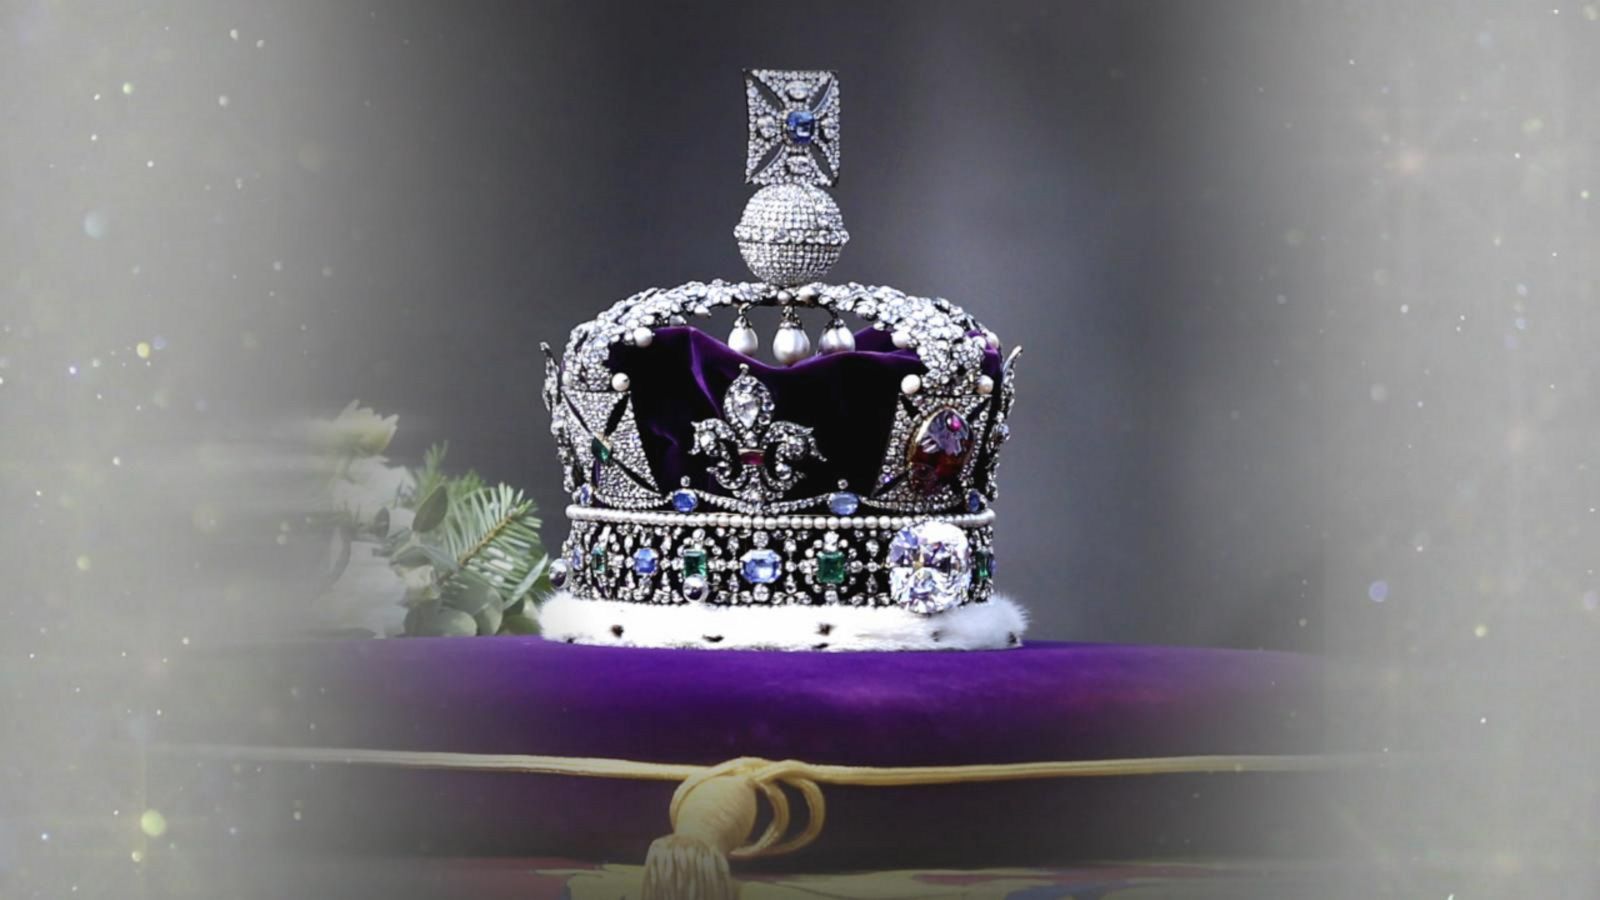 The Crown Jewels You Have Never Seen - The New York Times